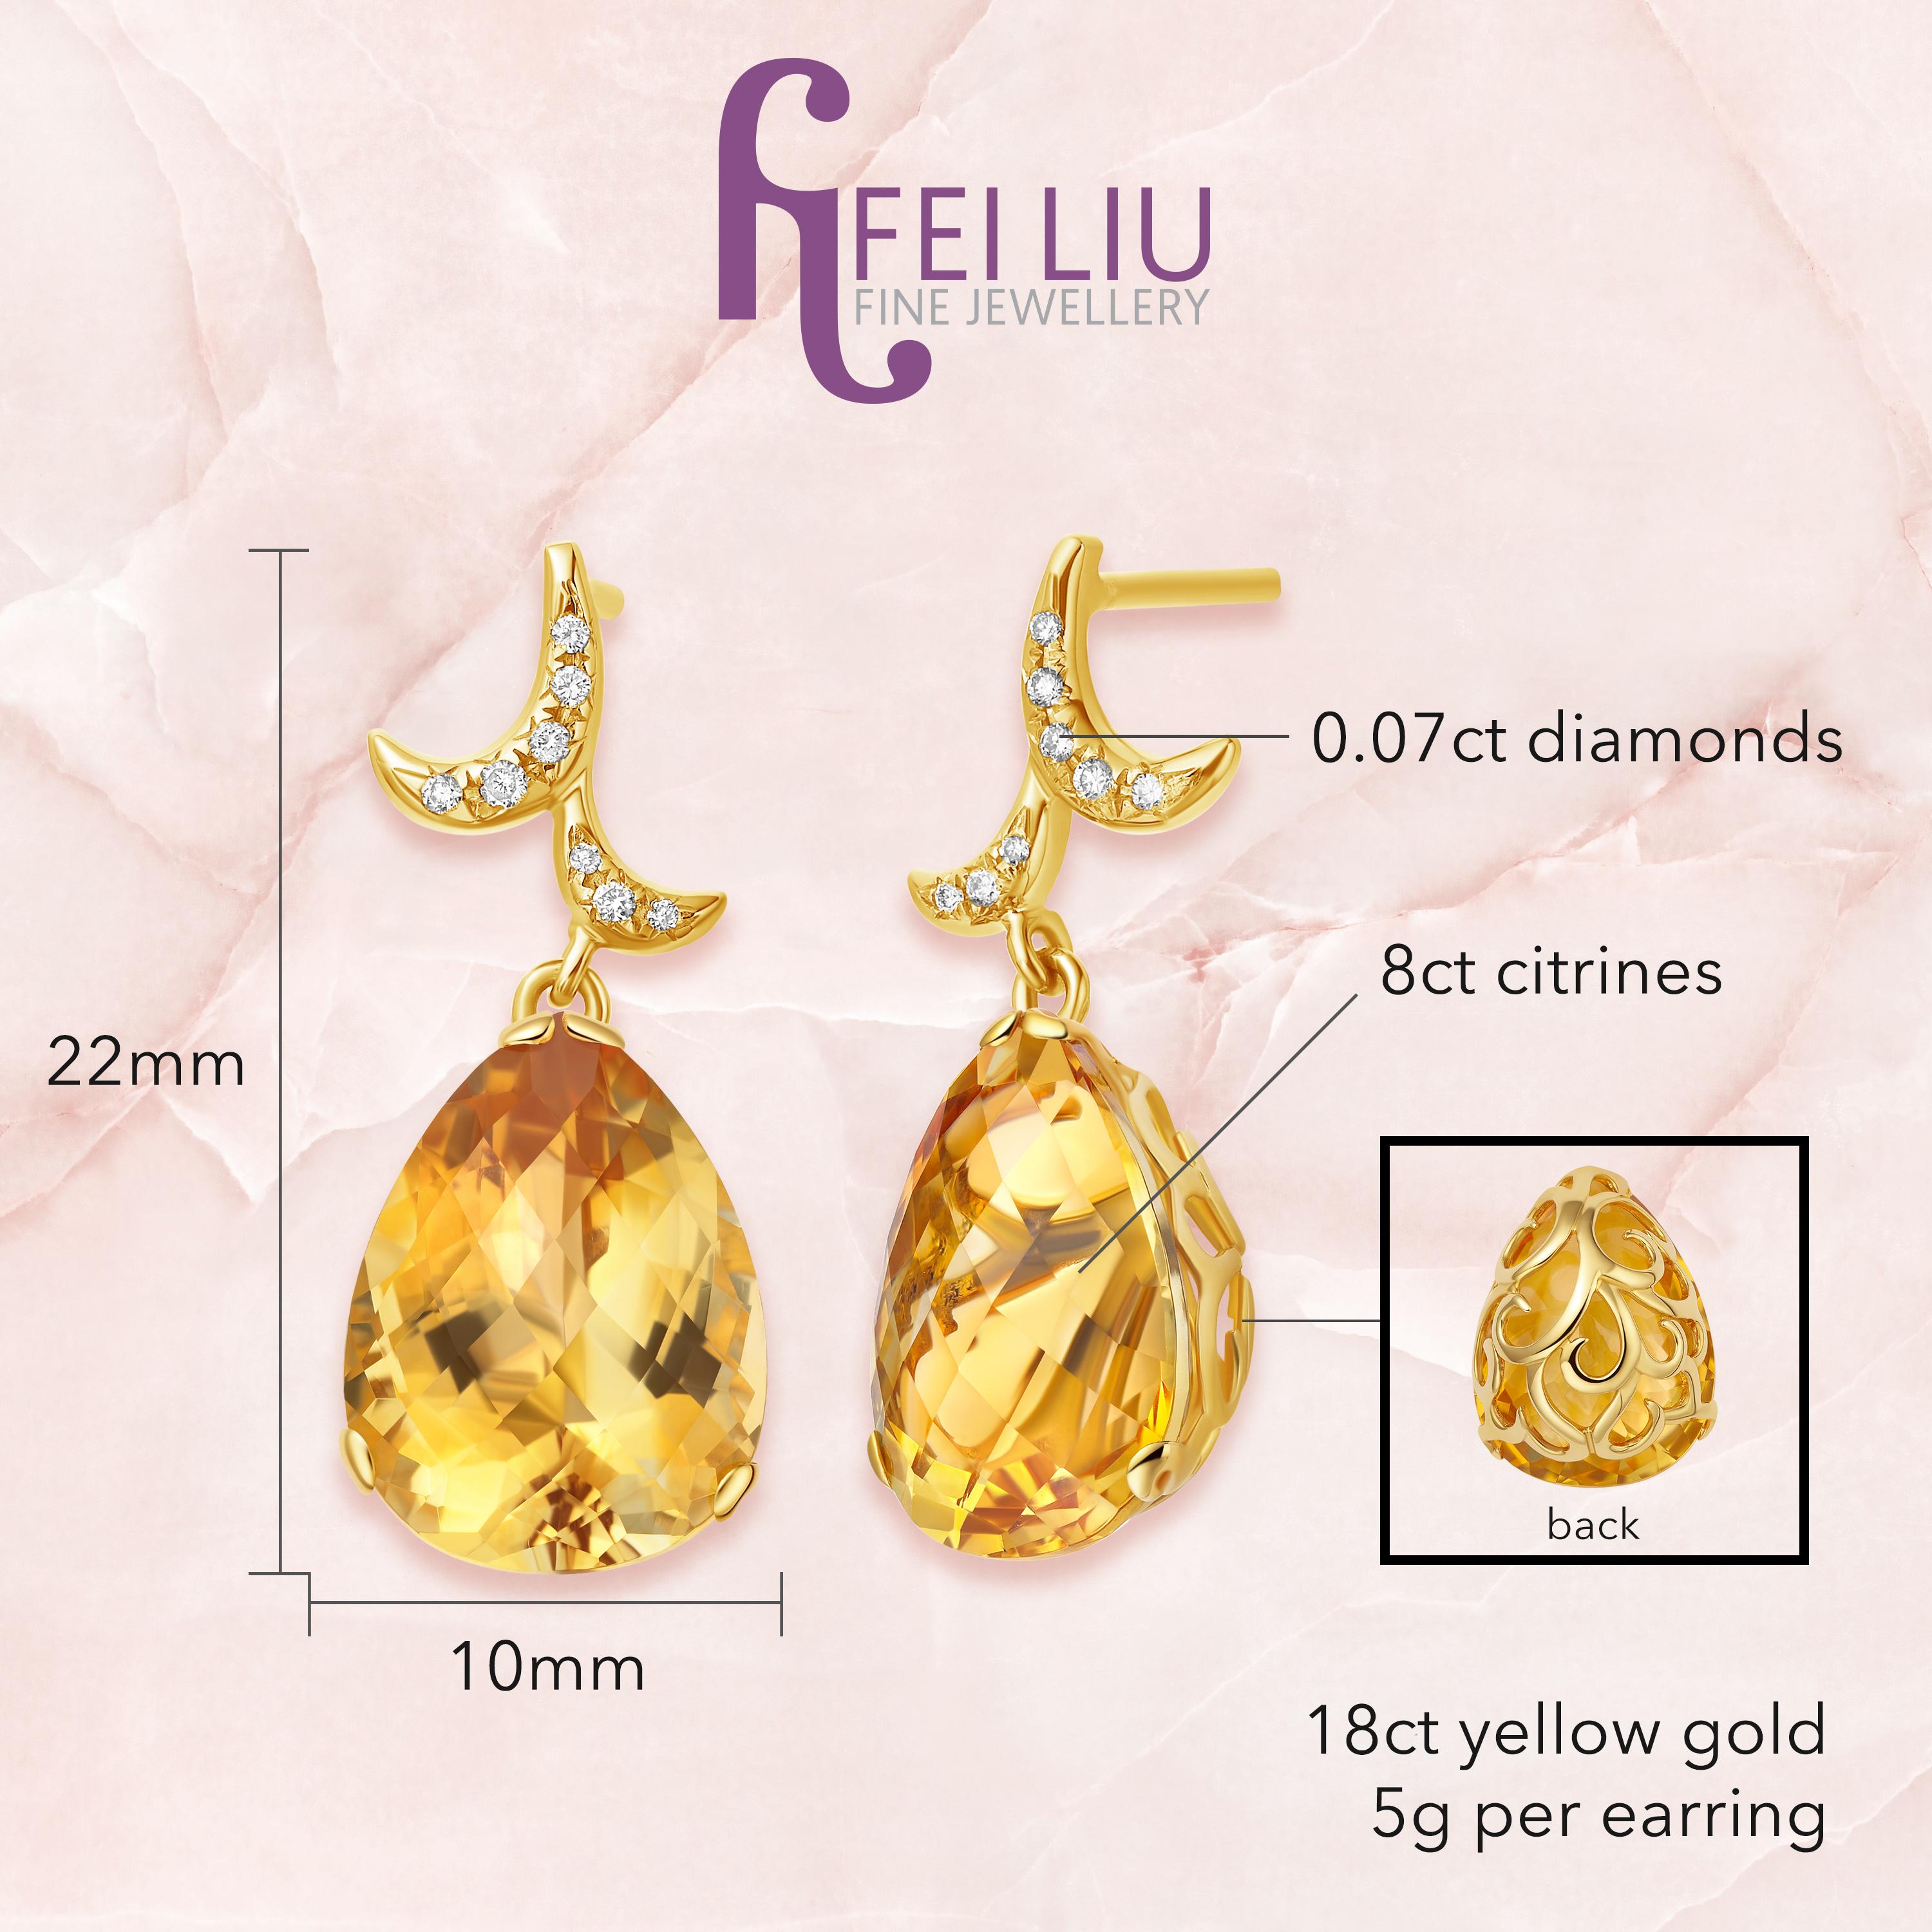 Description:
Whispering small pear stone drop earrings with 8ct citrines and 0.07ct diamonds, set in a 18ct yellow gold filigree setting.

Inspiration:
Emulating femininity and glamour, the Whispering collection is full of colour and form. Inspired